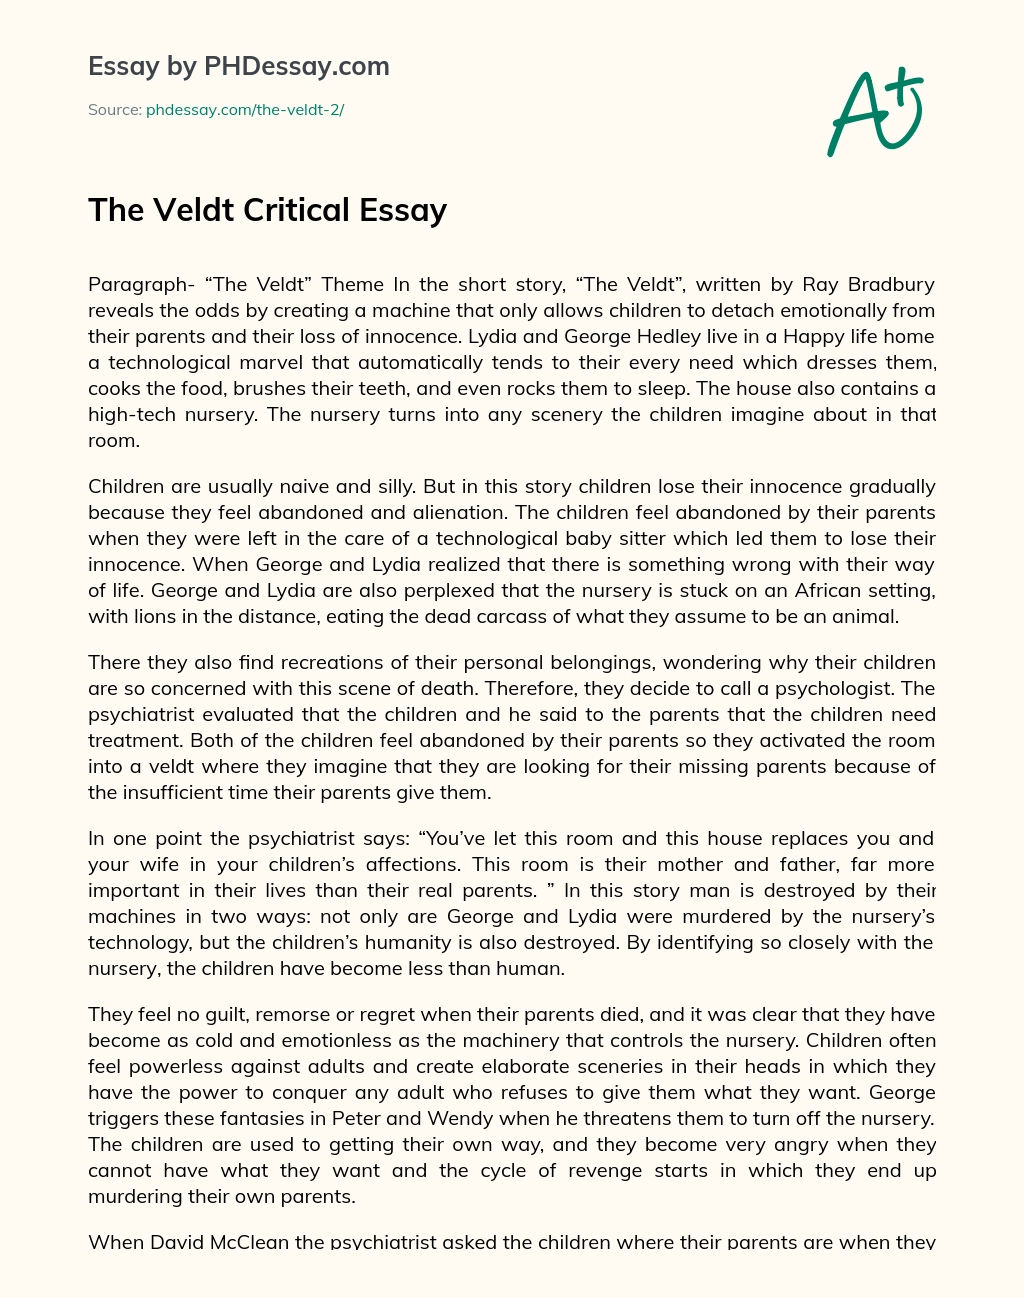 thesis of the veldt